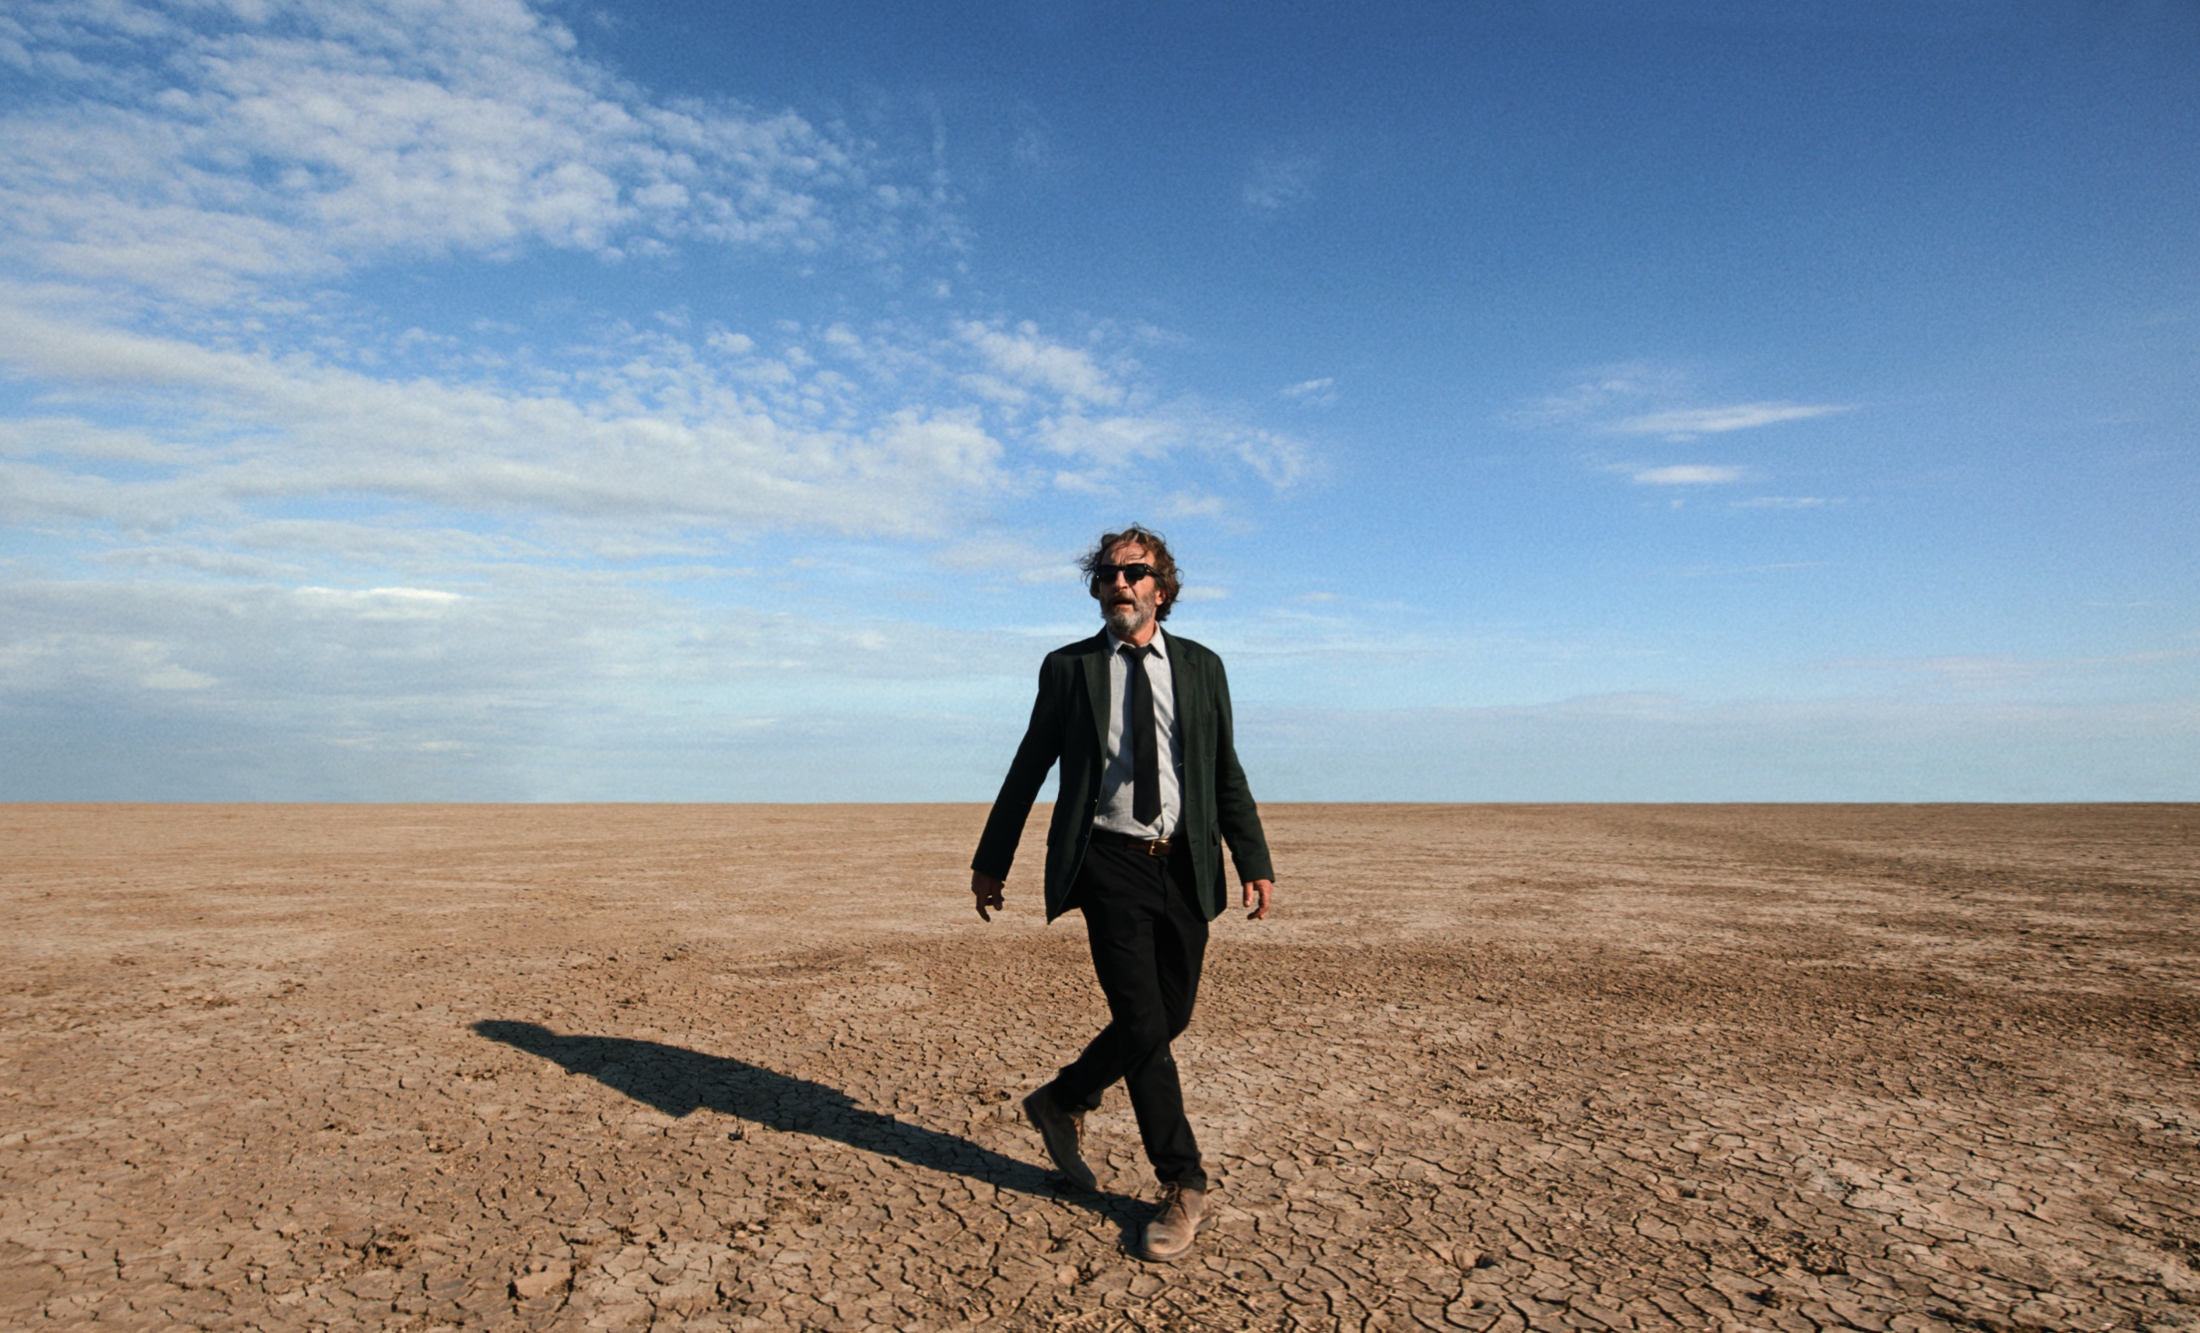 'Bardo' Daniel Giménez Cacho as Silverio Gacho (1) walking in the desert wearing a suit, tie, and sunglasses. His long shadow on the ground behind him.